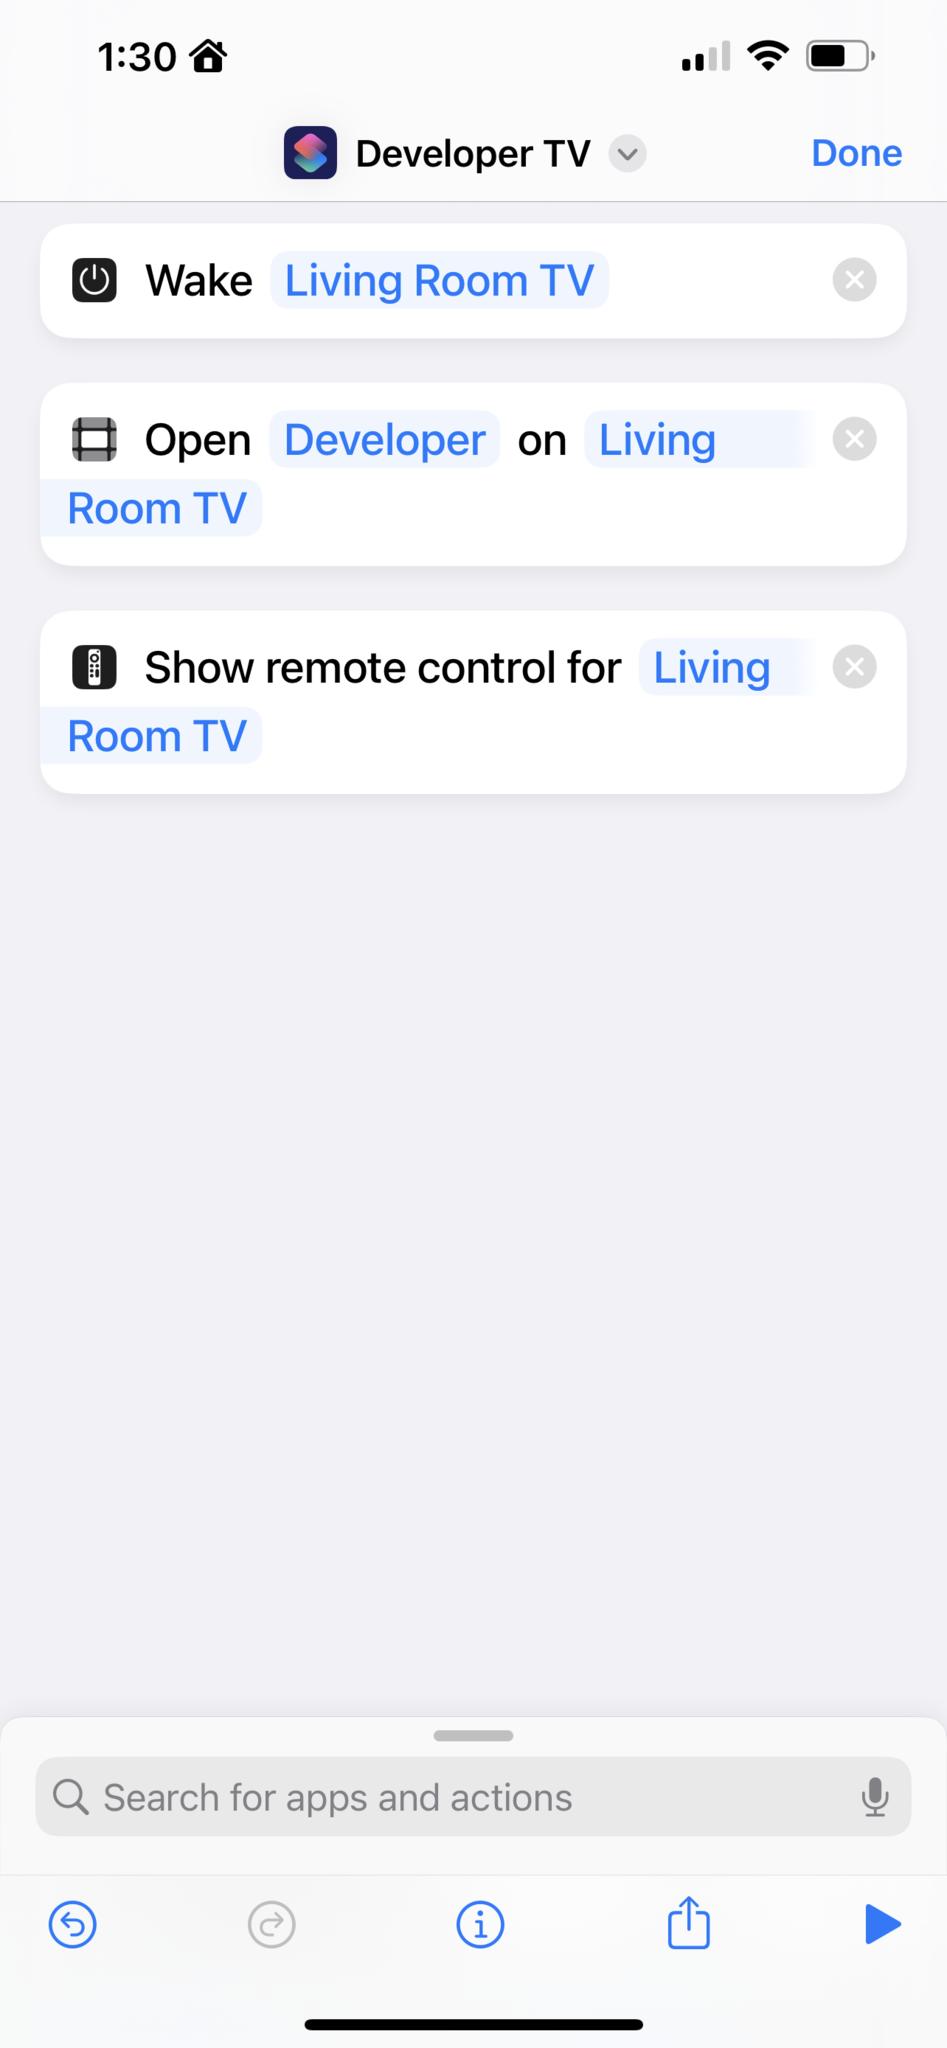 Screenshot showing the "Developer TV" shortcut with the Wake Apple TV, Open App on Apple TV, and Show Remote Control actions included.